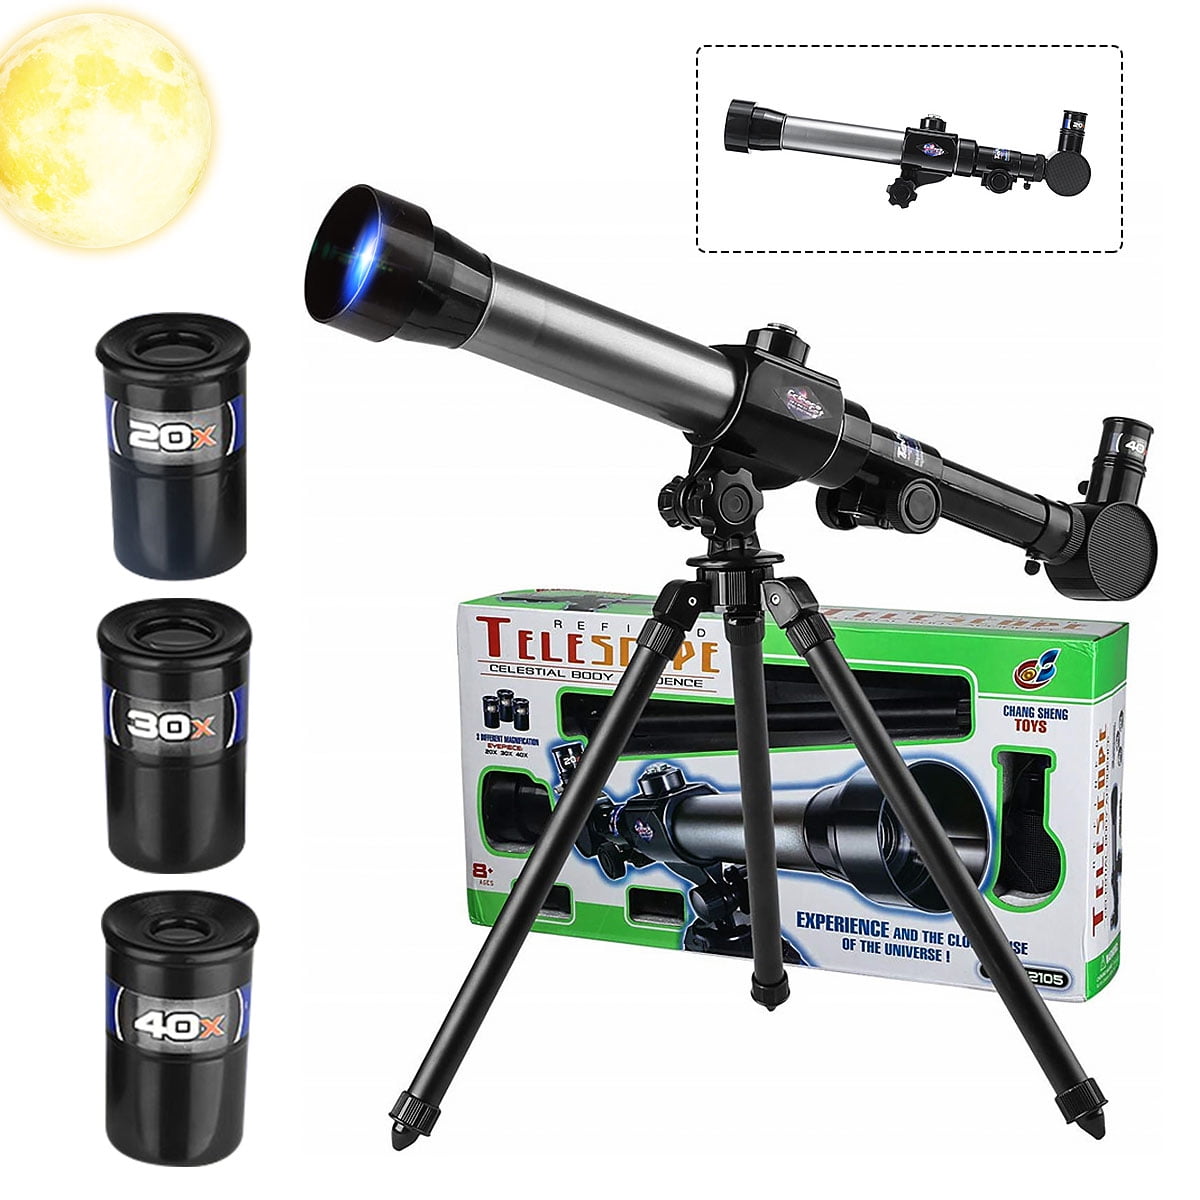 Purple Telescope Gift for Kids 60X Interchangeable Eyepieces 40X Telescope for Kids and Beginners,Portable Kids Telescope with Adjustable Tripod and 20X 